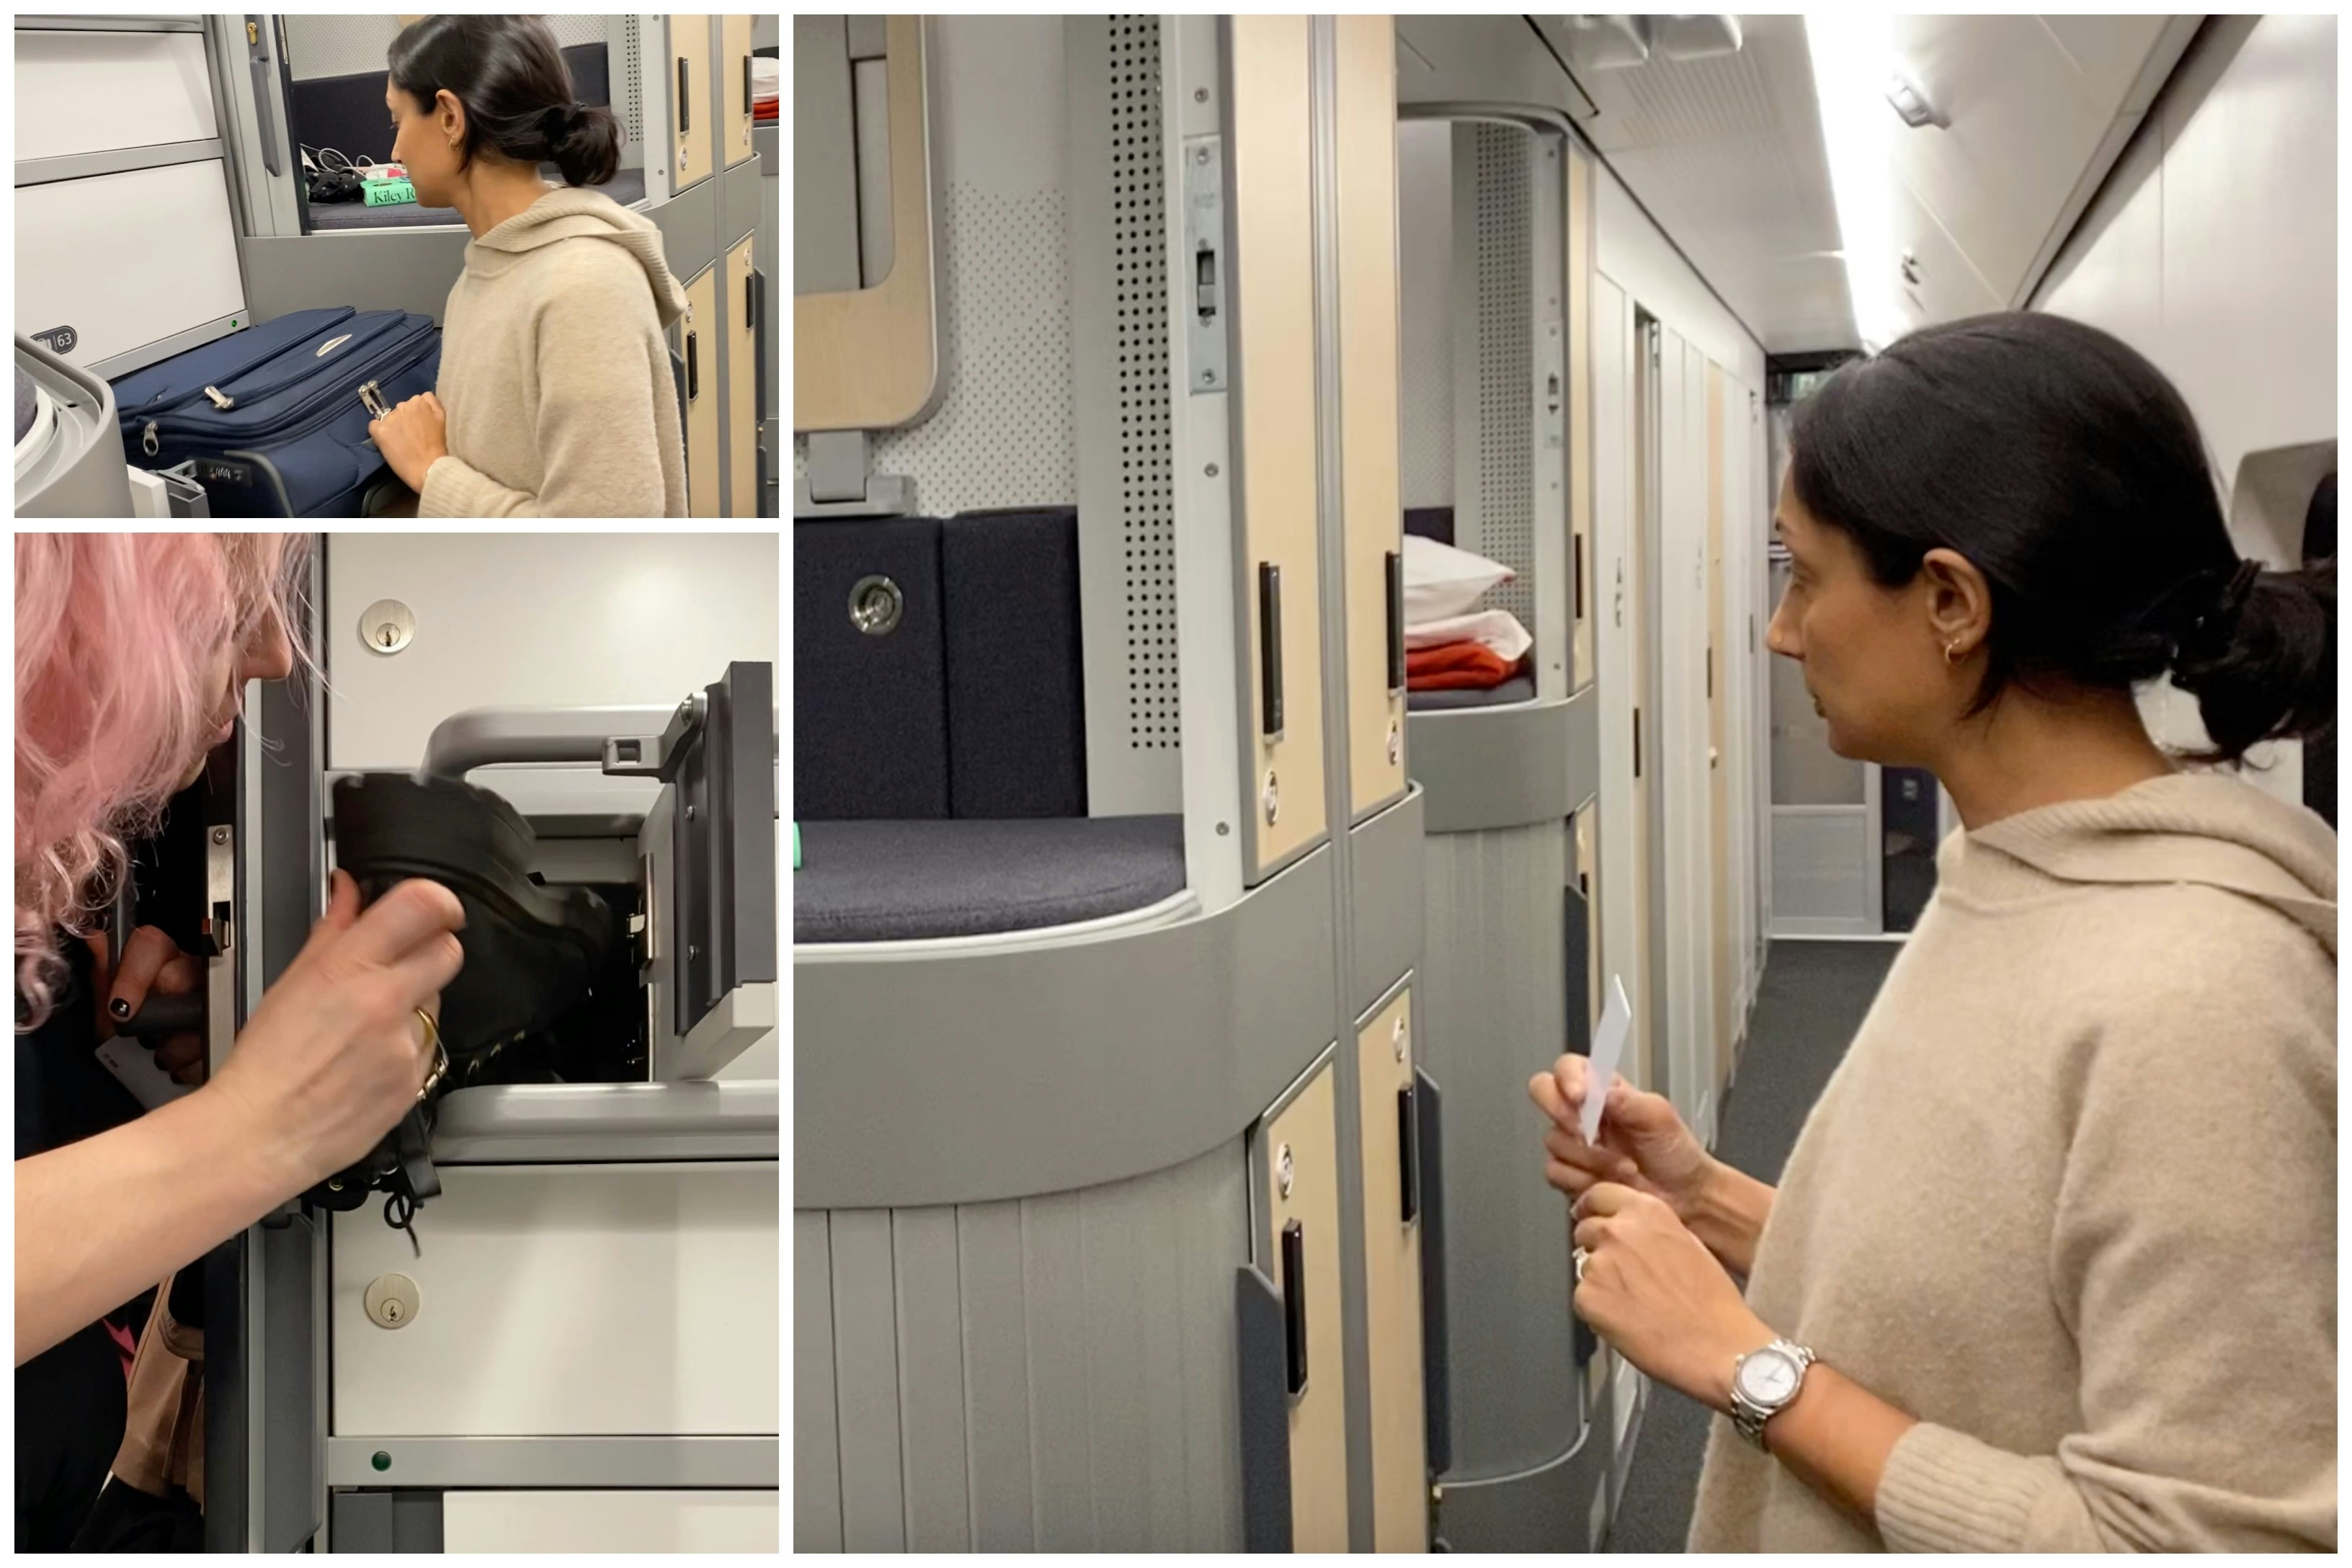 A woman uses a key card to access a storage locker for a suitcase on a narrow train corridor